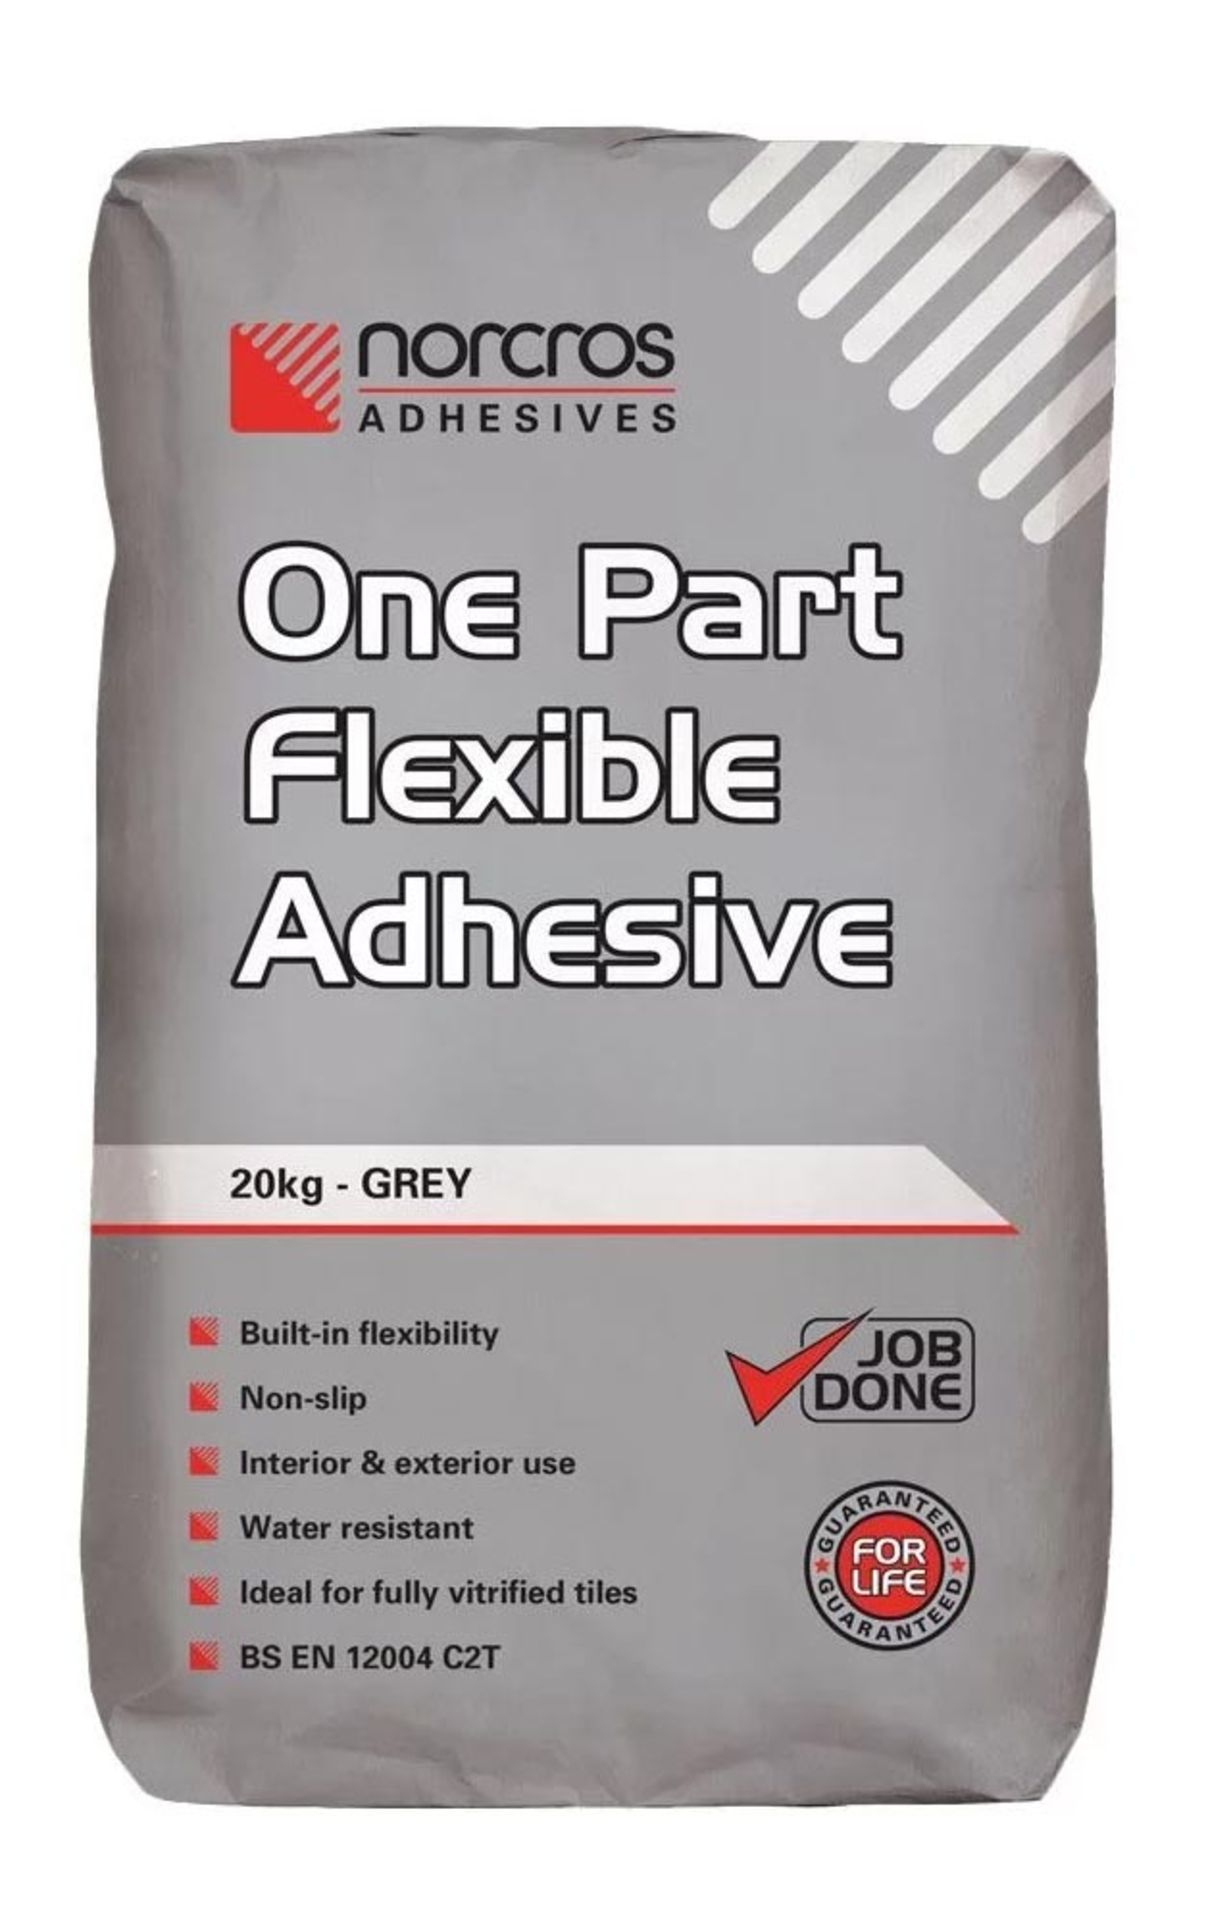 24 X BRAND NEW 20KG BAGS OF NOCROS ONE PART FLEXIBLE ADHESIVE R12-9